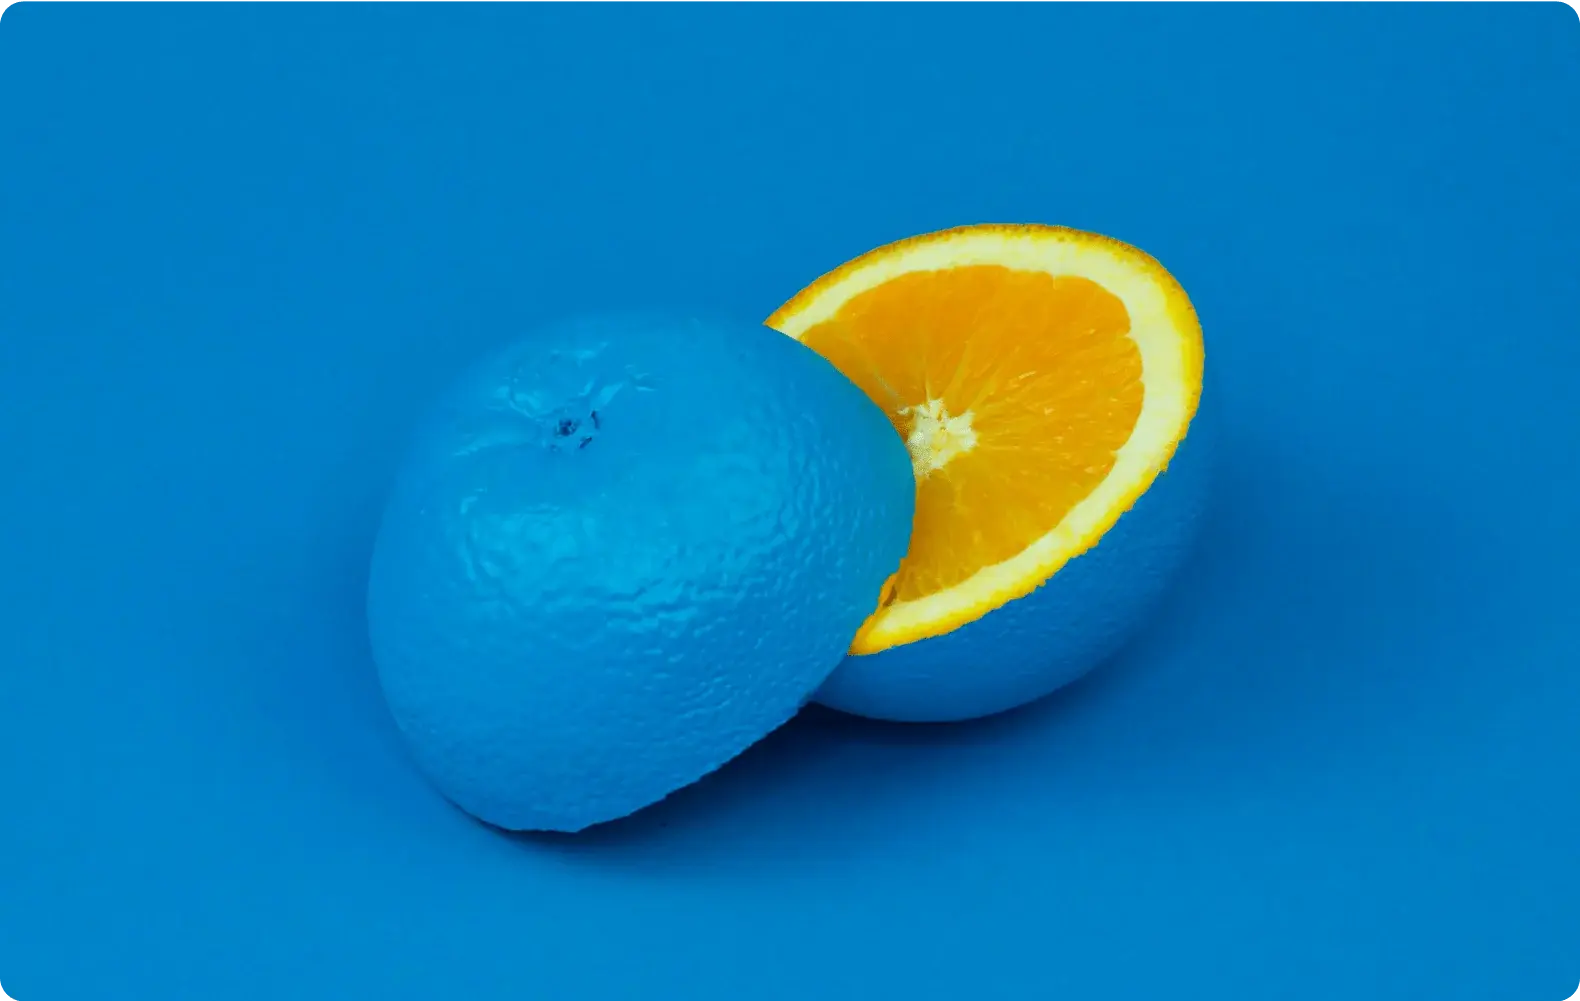 Image of an orange with an unexpected blue exterior to indicate standing out.